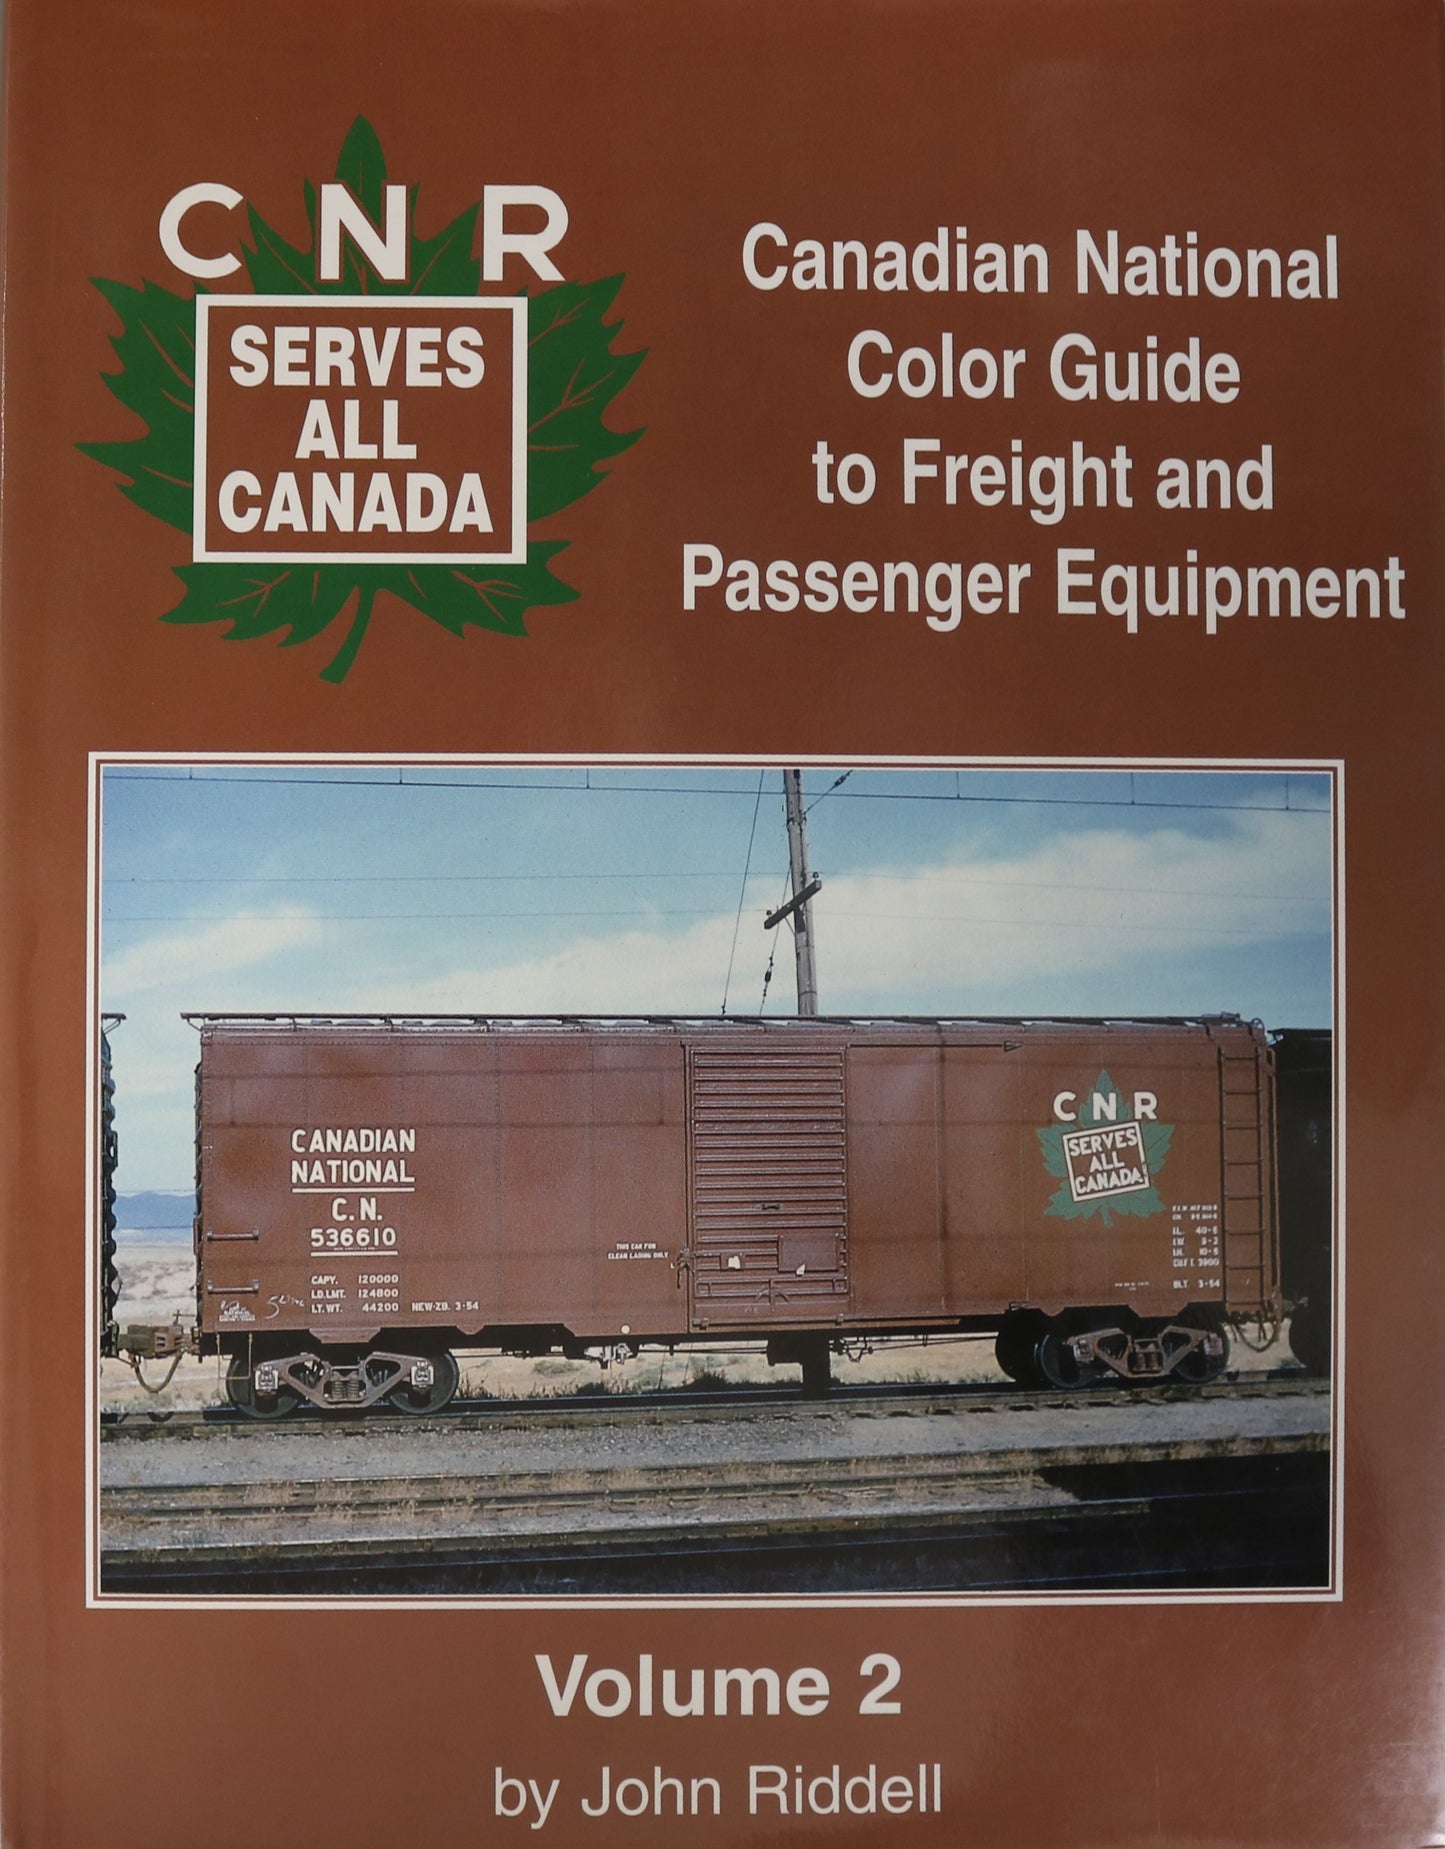 Canadian National Color Guide Vol2 Freight Passenger CN CNR Railway Railroad Book